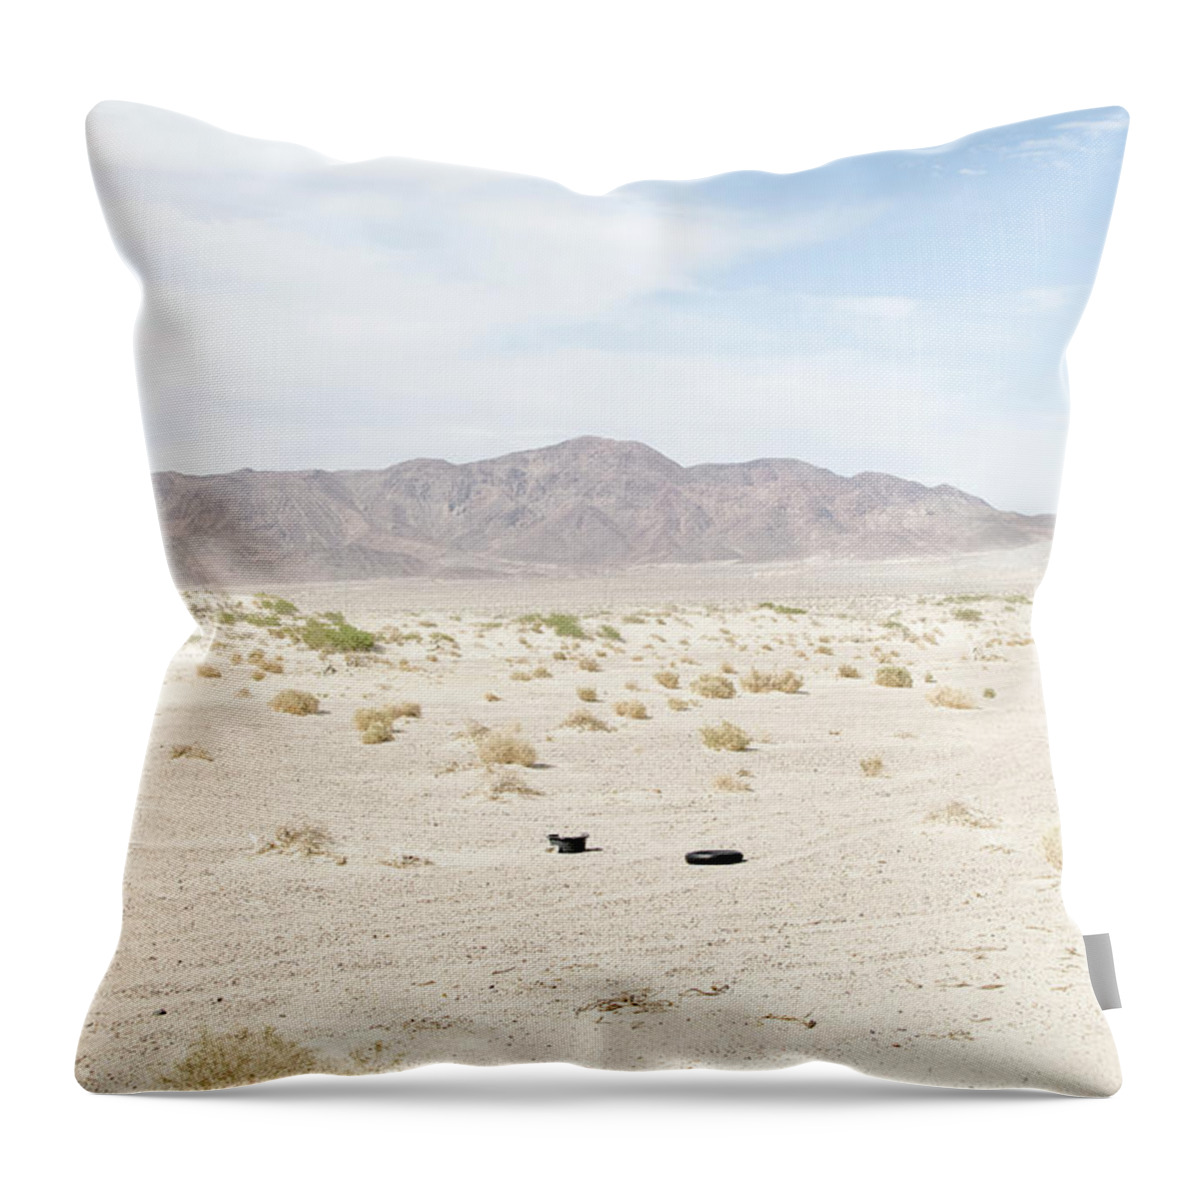 Scenics Throw Pillow featuring the photograph Car Tire In Desert by Peter Starman